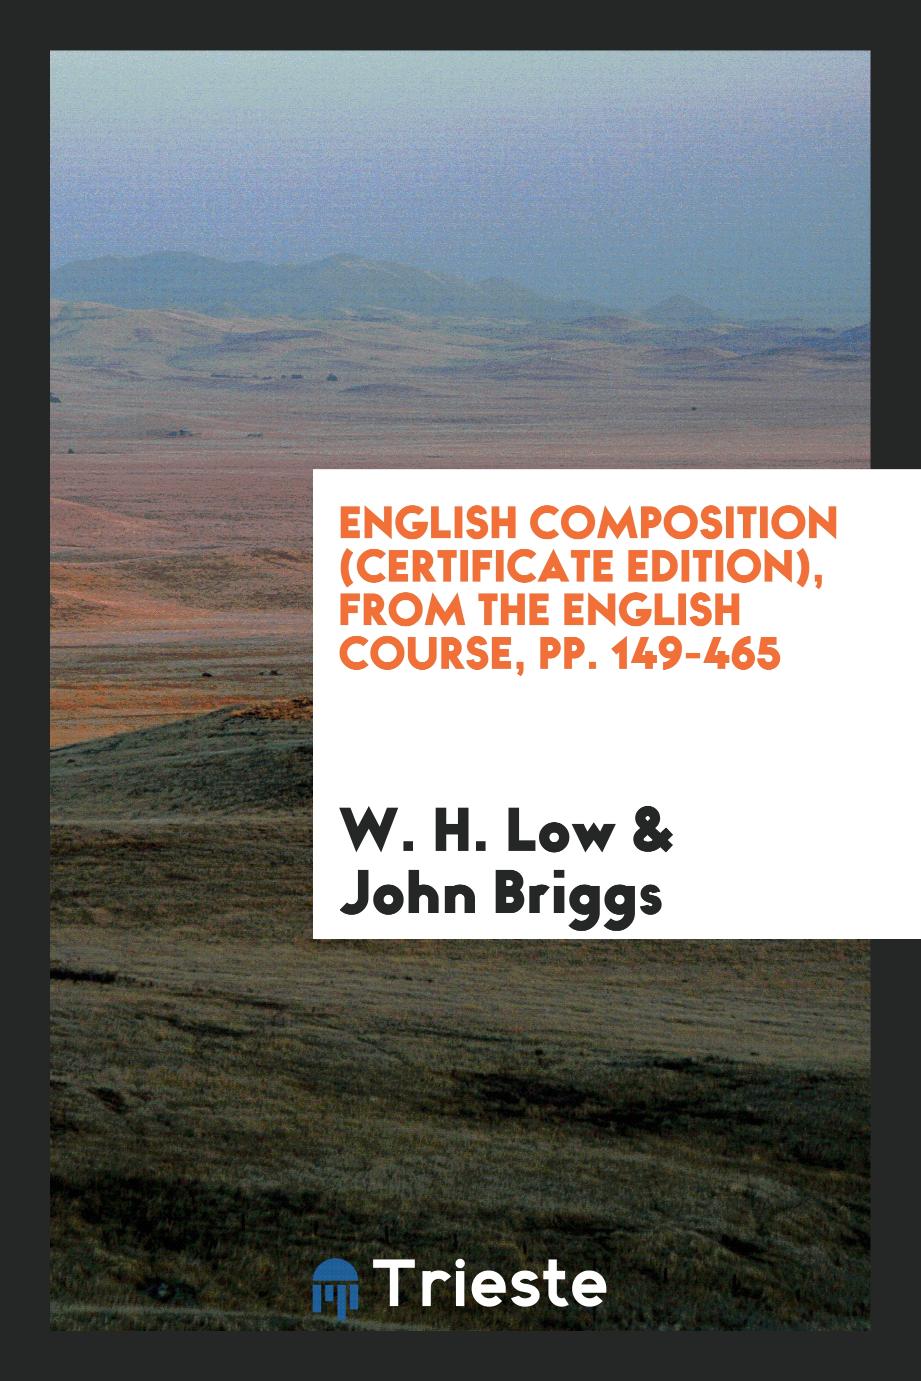 English composition (certificate edition), from the English course, pp. 149-465